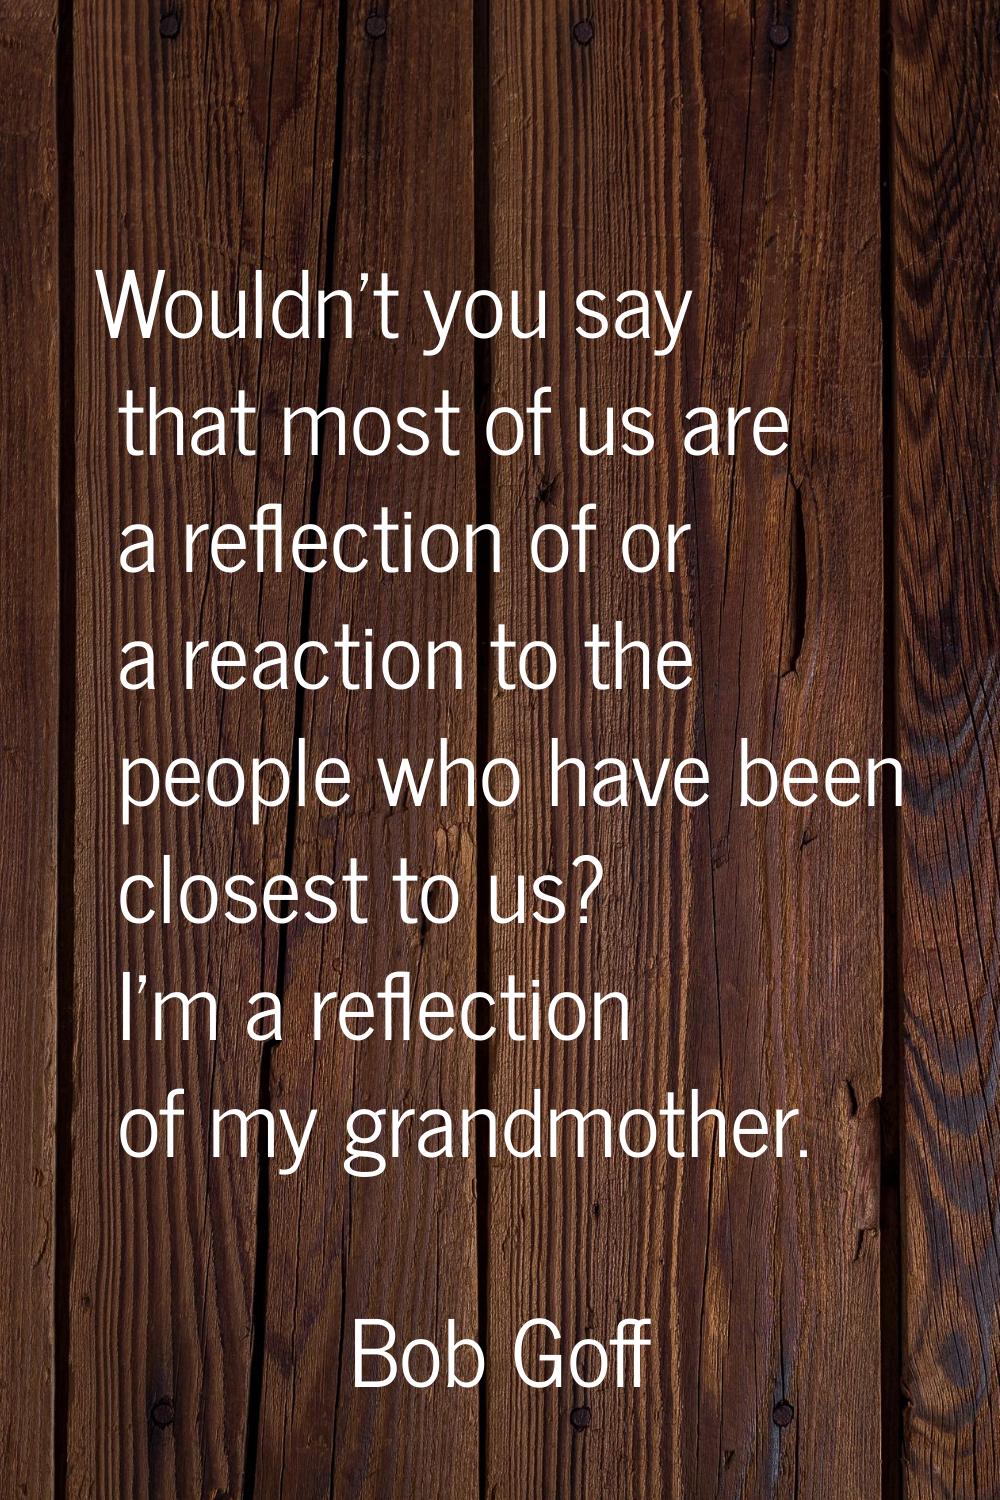 Wouldn't you say that most of us are a reflection of or a reaction to the people who have been clos